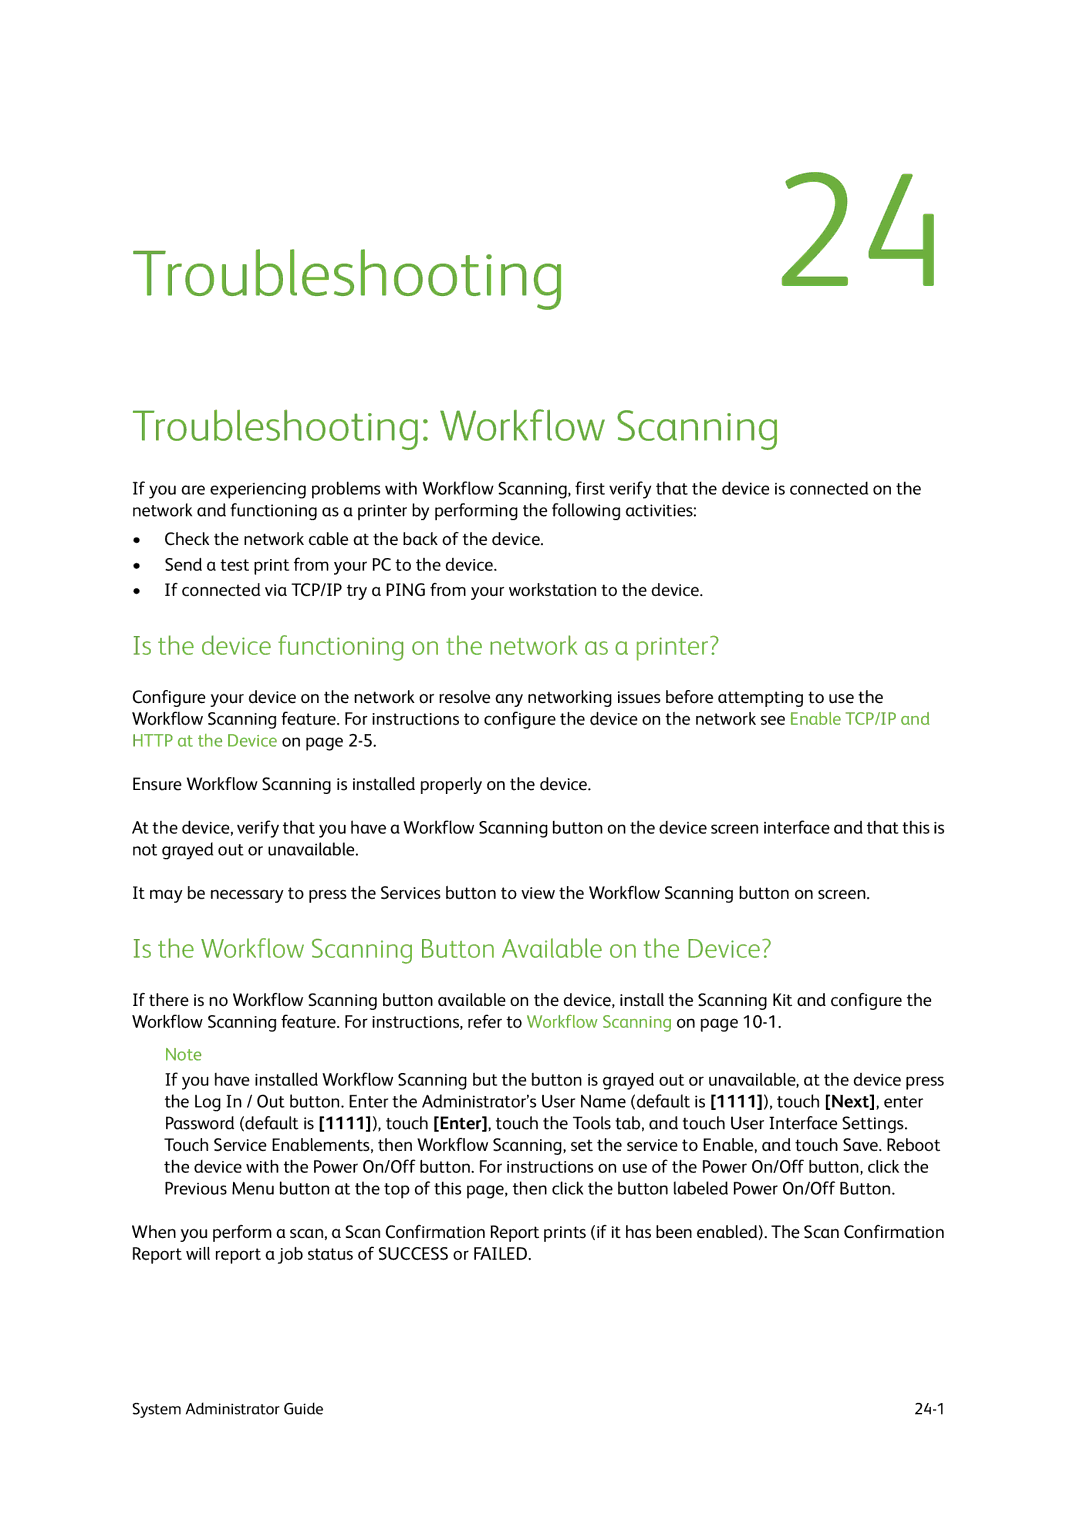 Xerox 9203, 9202, 9201 manual Troubleshooting Workflow Scanning, Is the device functioning on the network as a printer? 